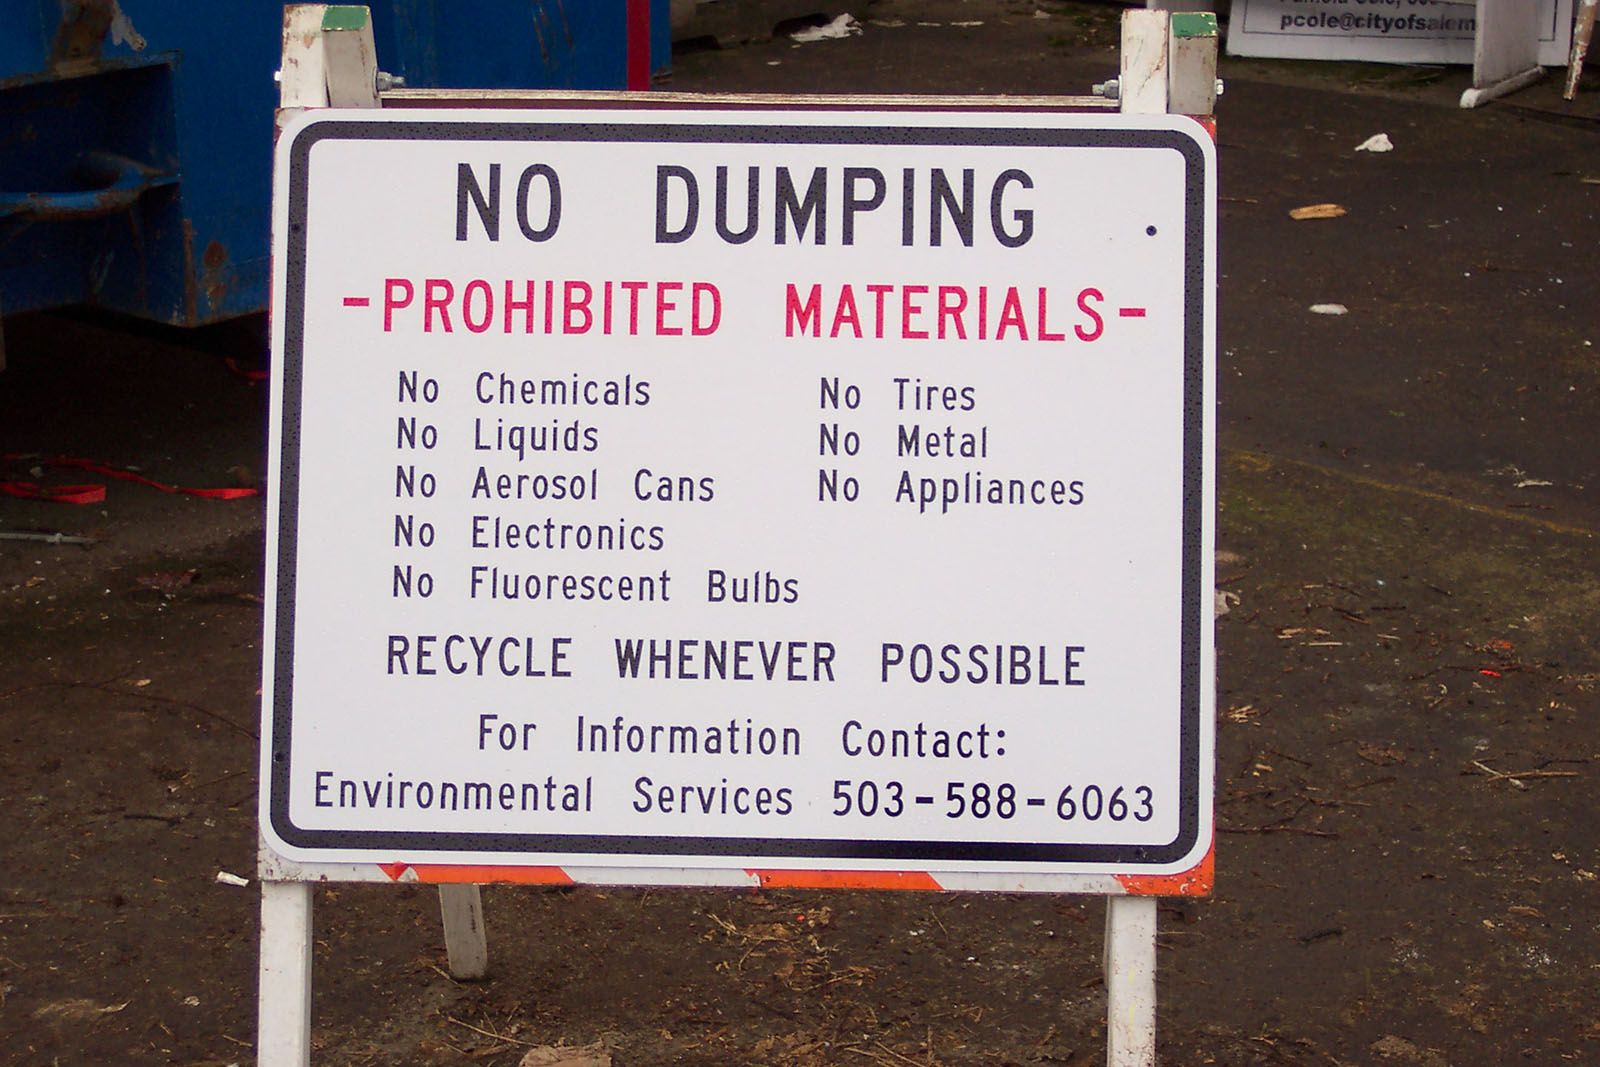 No Dumping - Prohibited materials sign